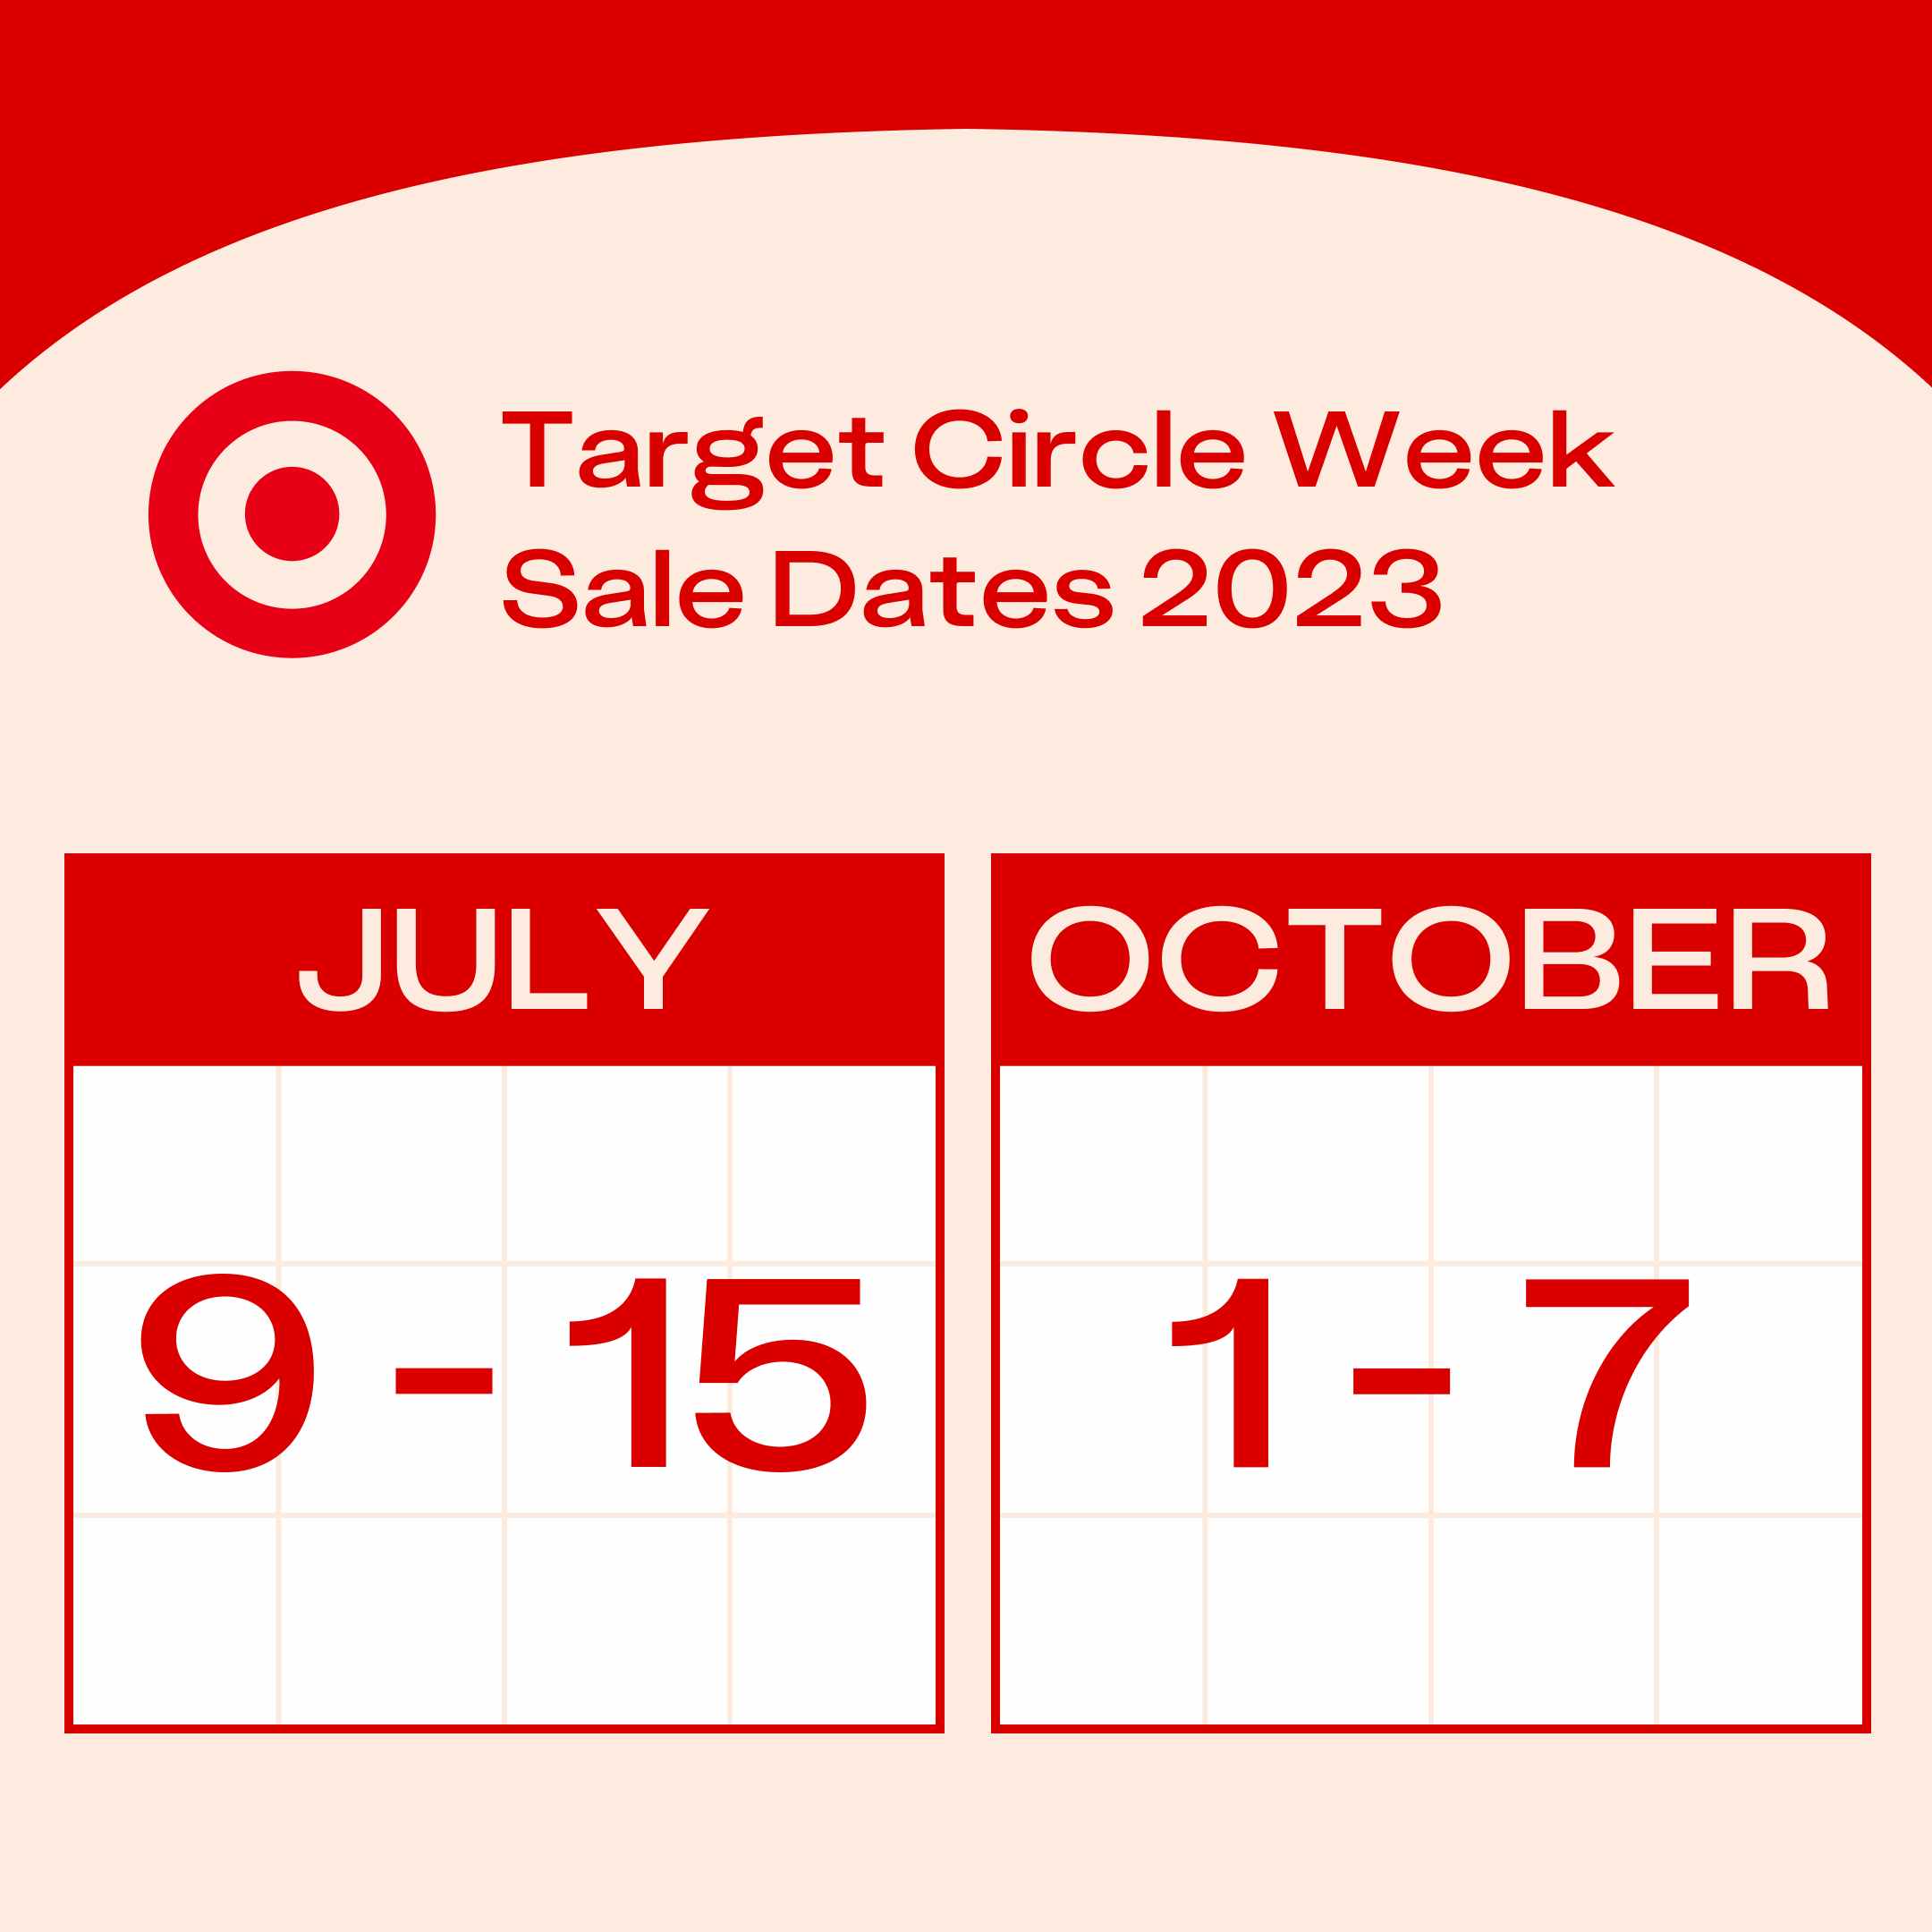 https://prod-cdn-thekrazycouponlady.imgix.net/wp-content/uploads/2023/09/target-circle-week-edit-1695330106-1695330106.png?auto=format&fit=fill&q=25